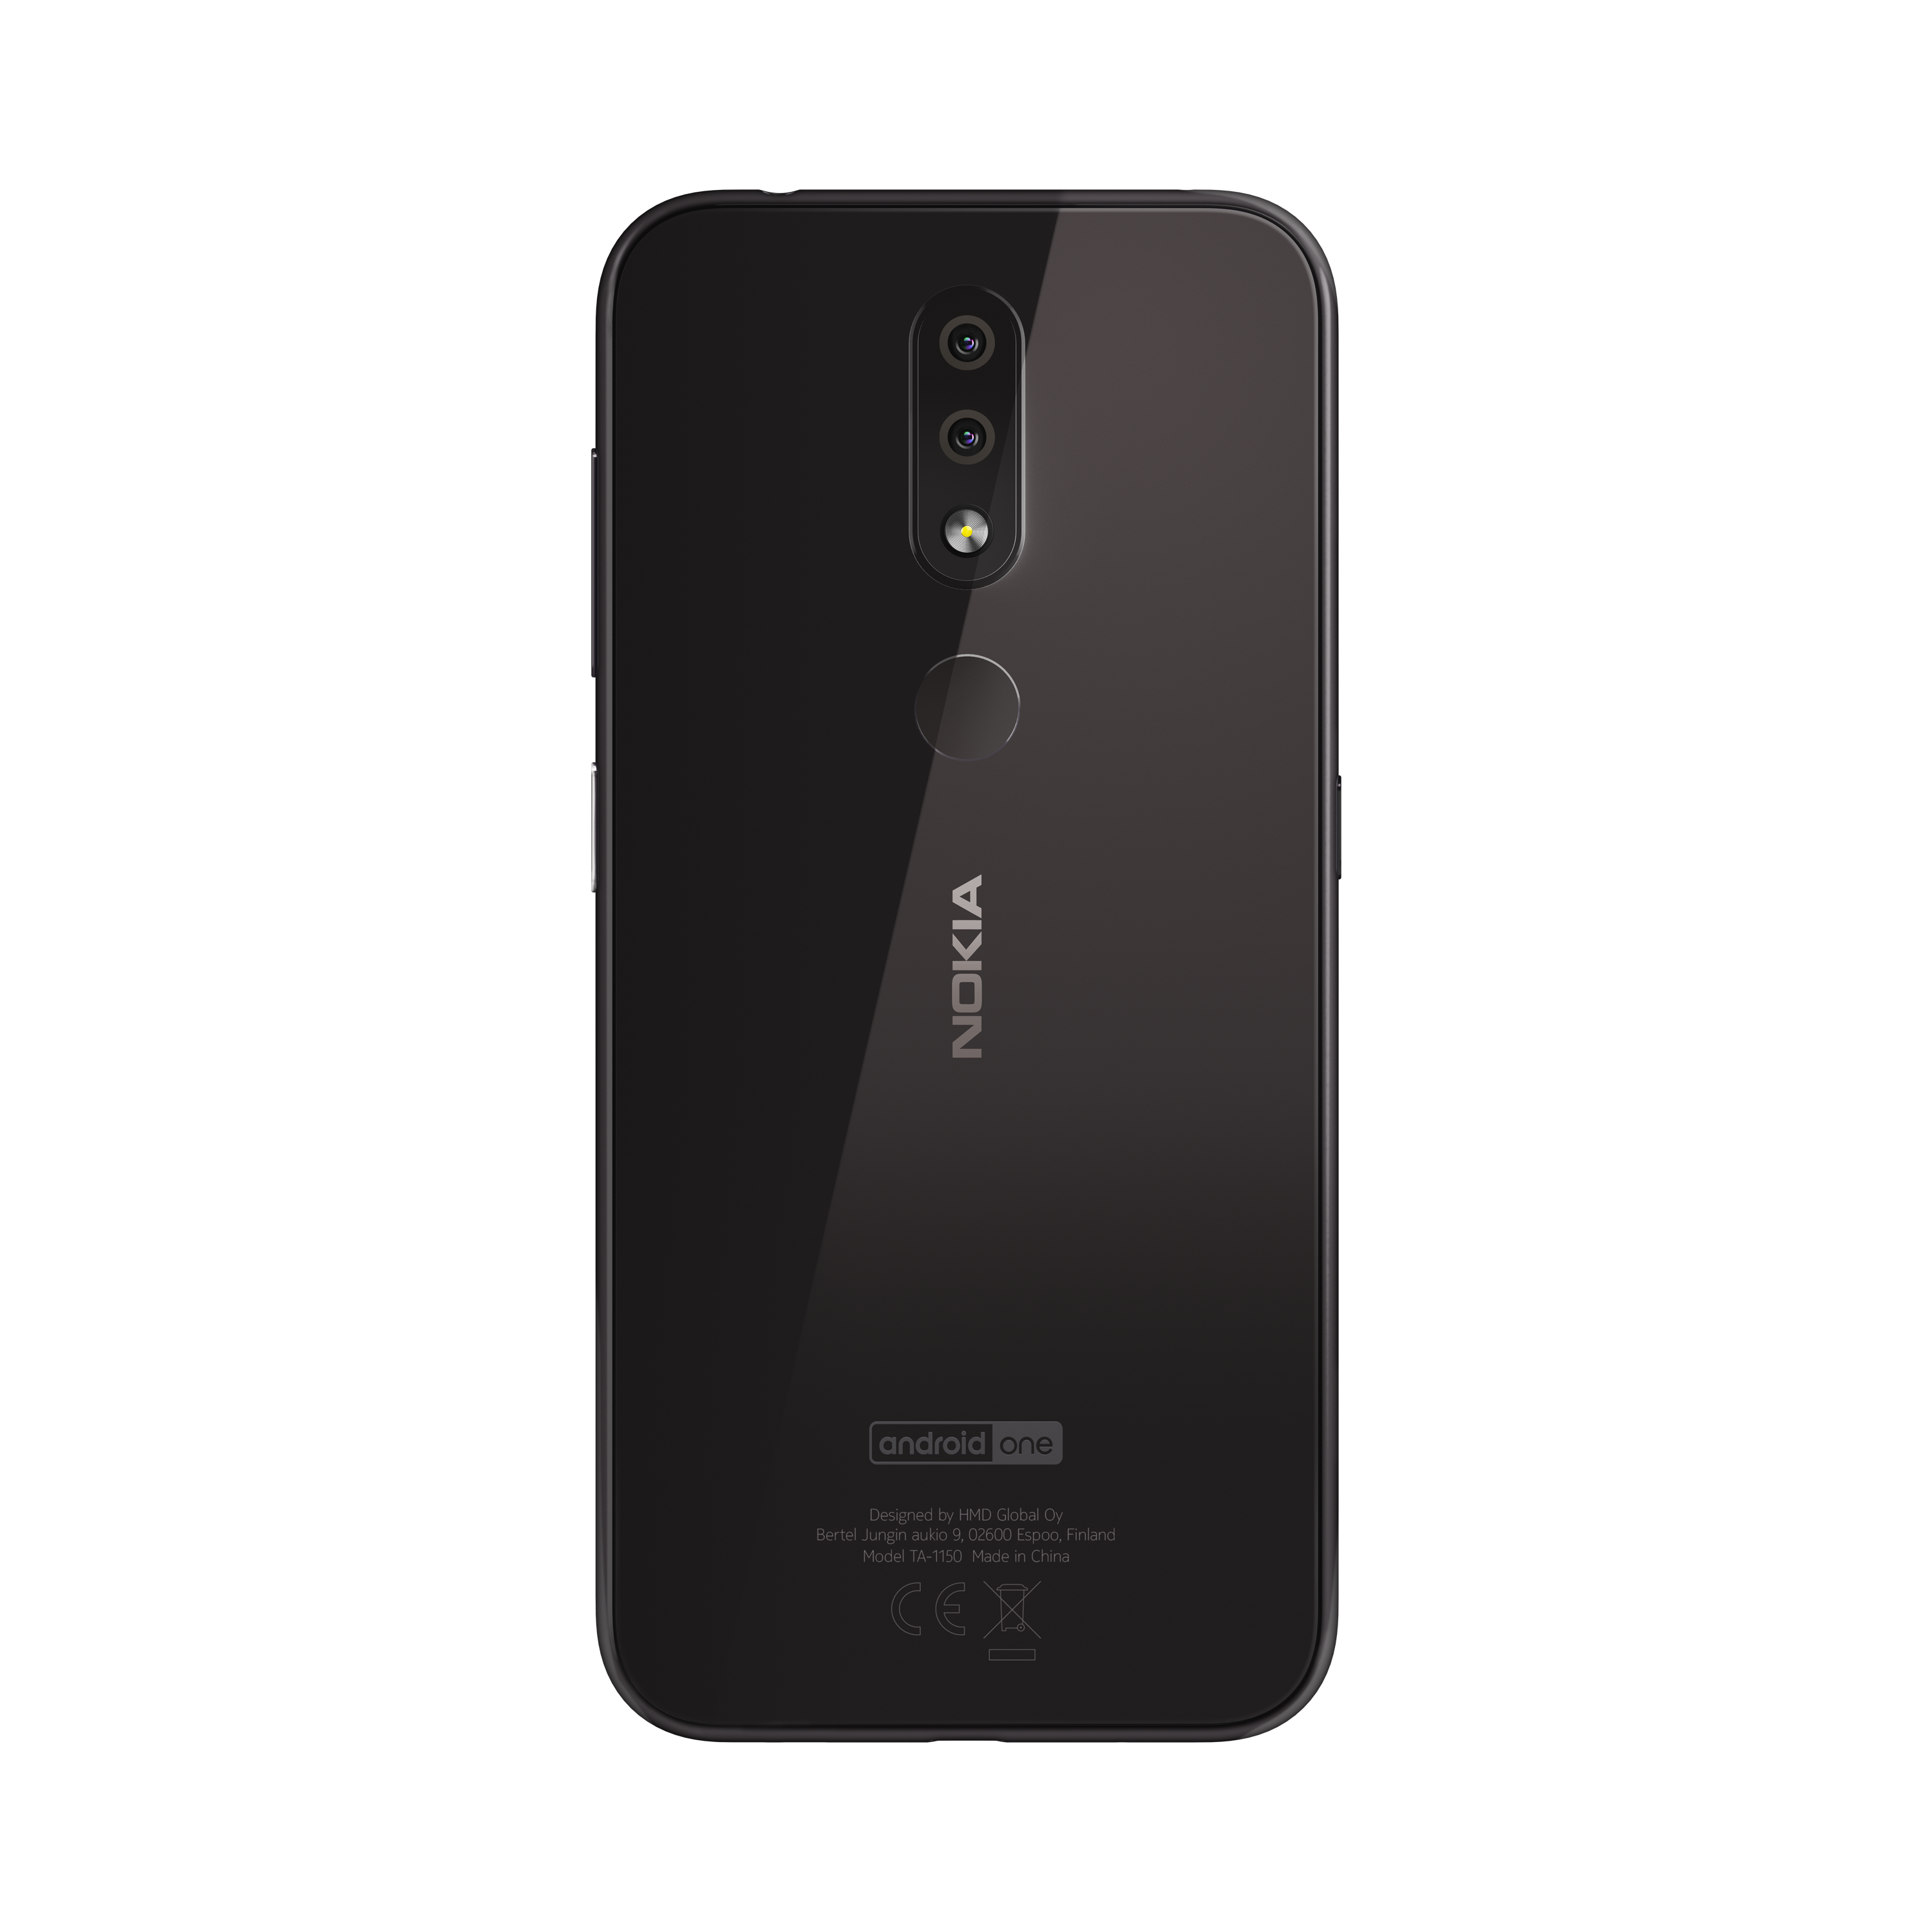 New Nokia smartphone TA-1188 appears in Russian certification